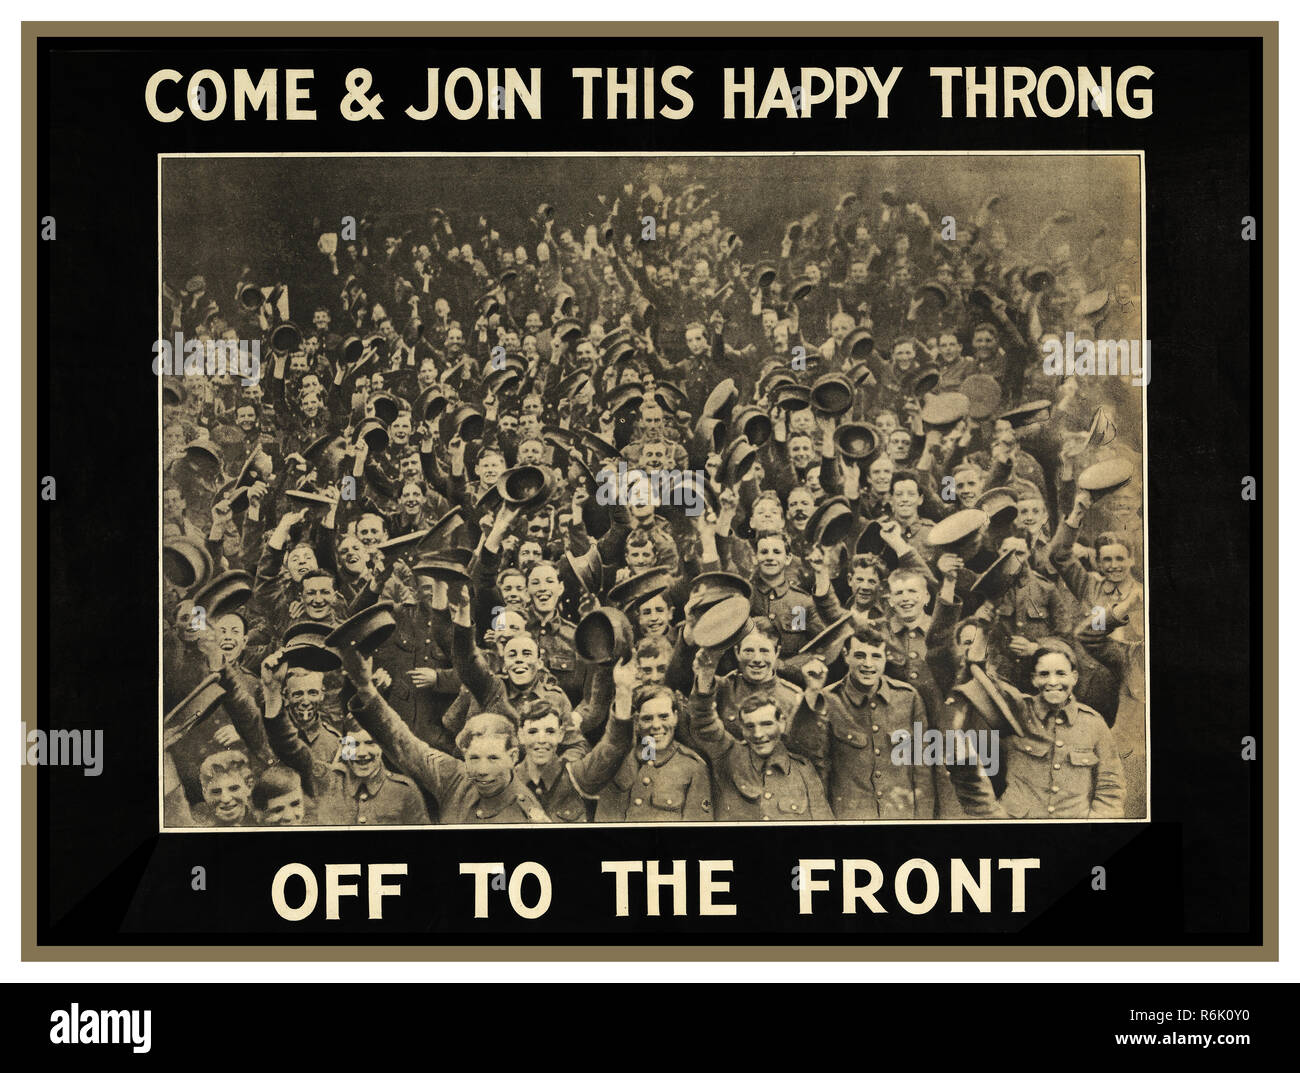 Vintage British WW1 Propaganda Recruitment Poster with image of a large crowd of smiling Irish infantrymen. They are holding their caps aloft.  “COME & JOIN THIS HAPPY THRONG OFF TO THE FRONT” 1914 World War 1 First World War Stock Photo